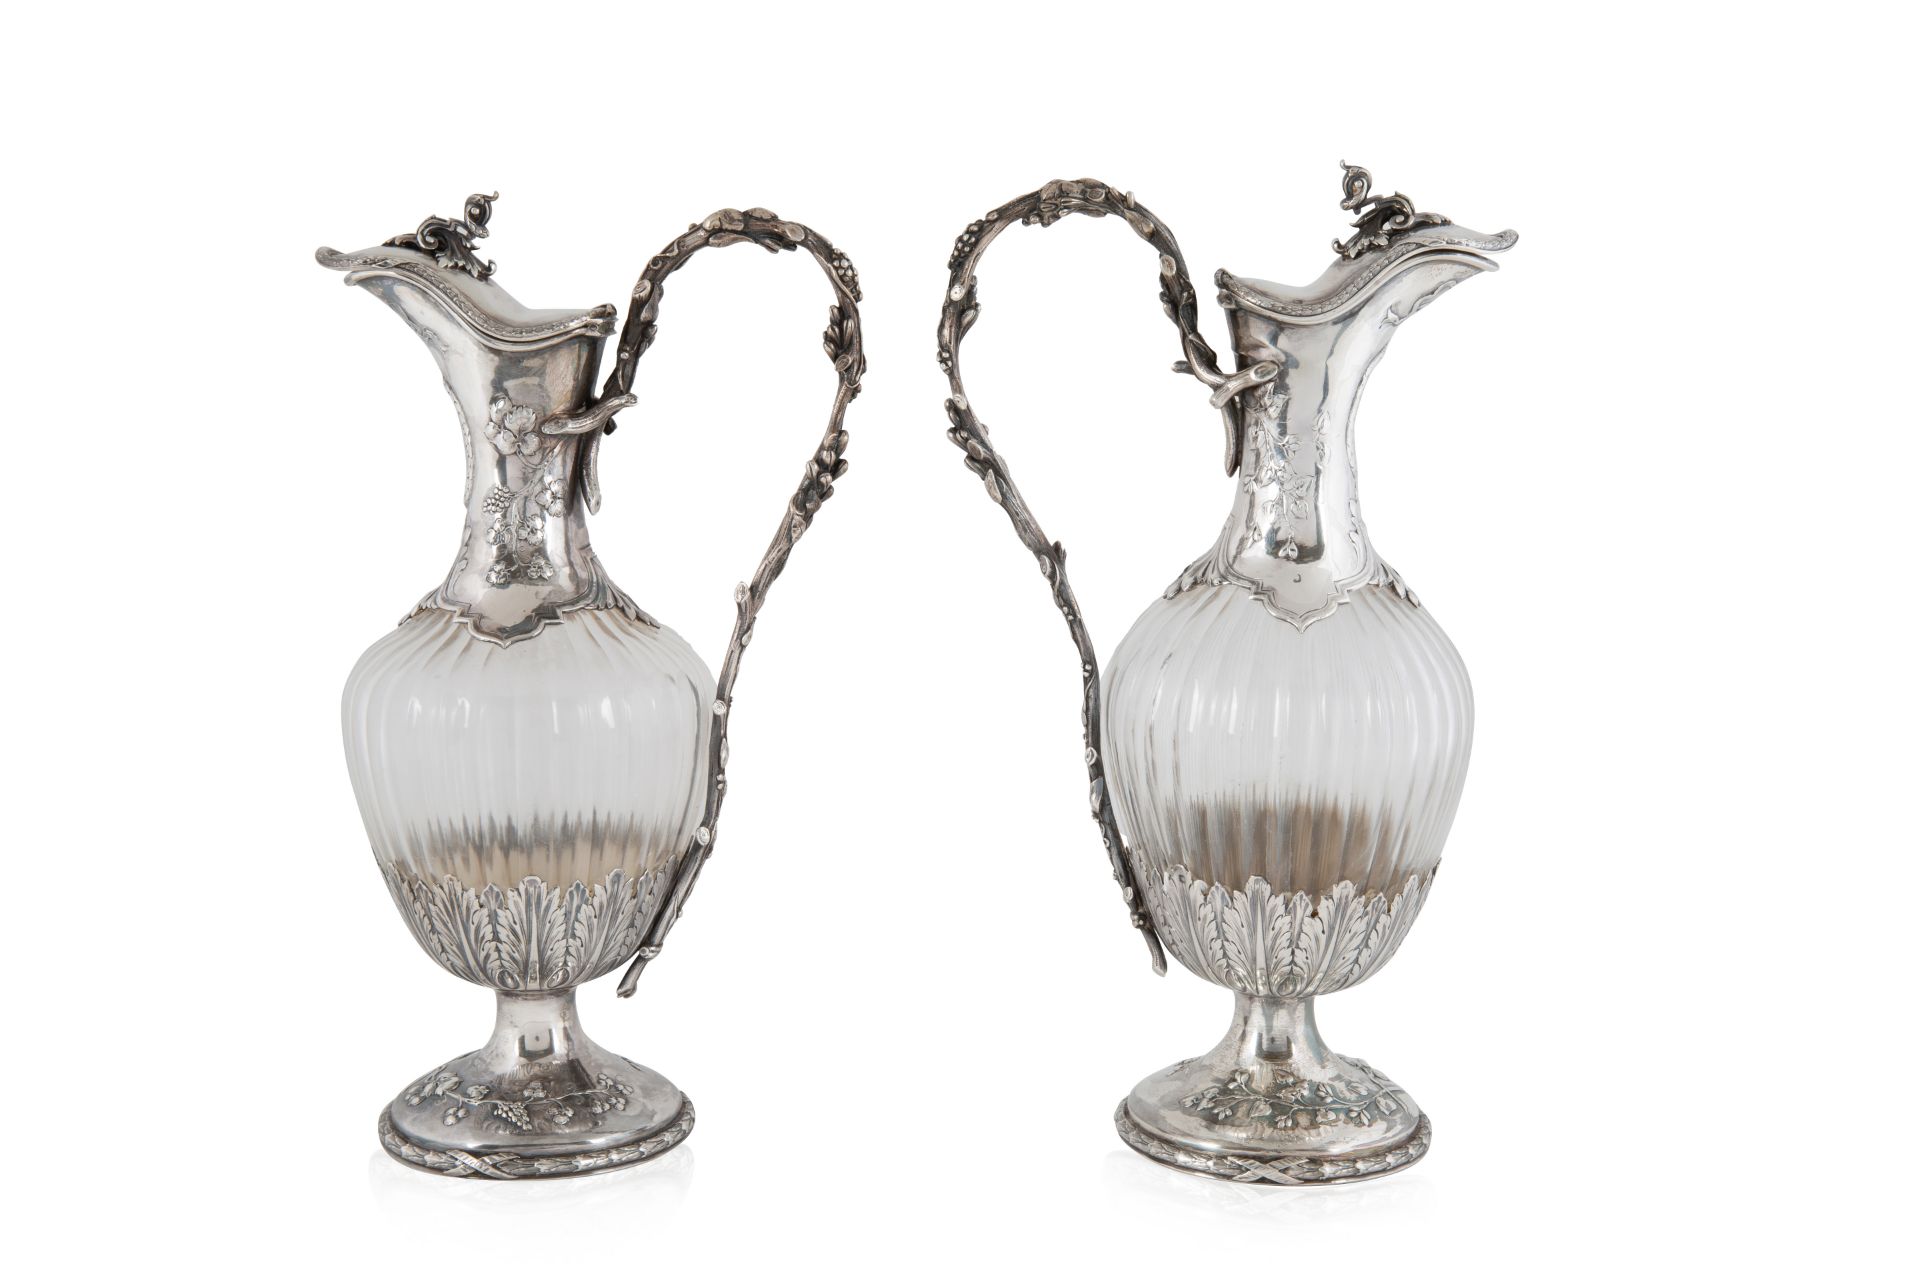 A PAIR OF ITALIAN SILVER AND GLASS PITCHERS, ASCANIO, EARLY 20TH CENTURY - Image 2 of 3